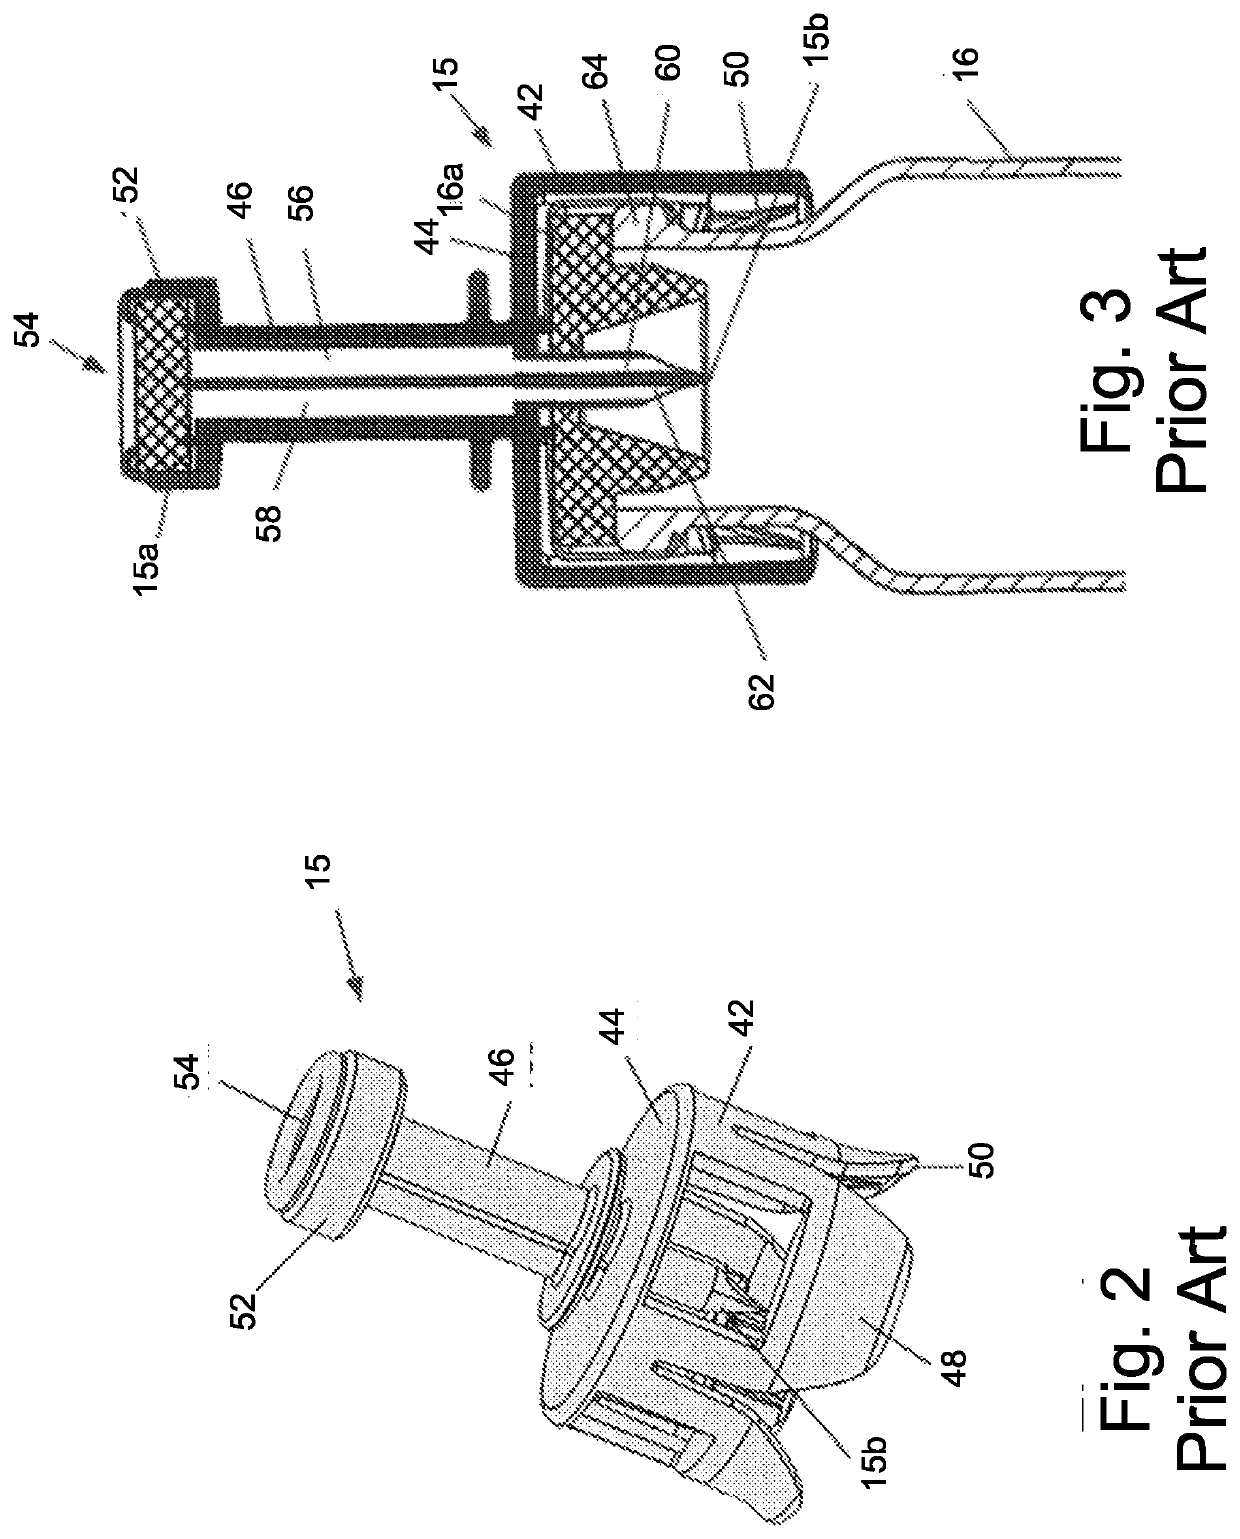 Components of open liquid drug transfer systems and a robotic system employing them